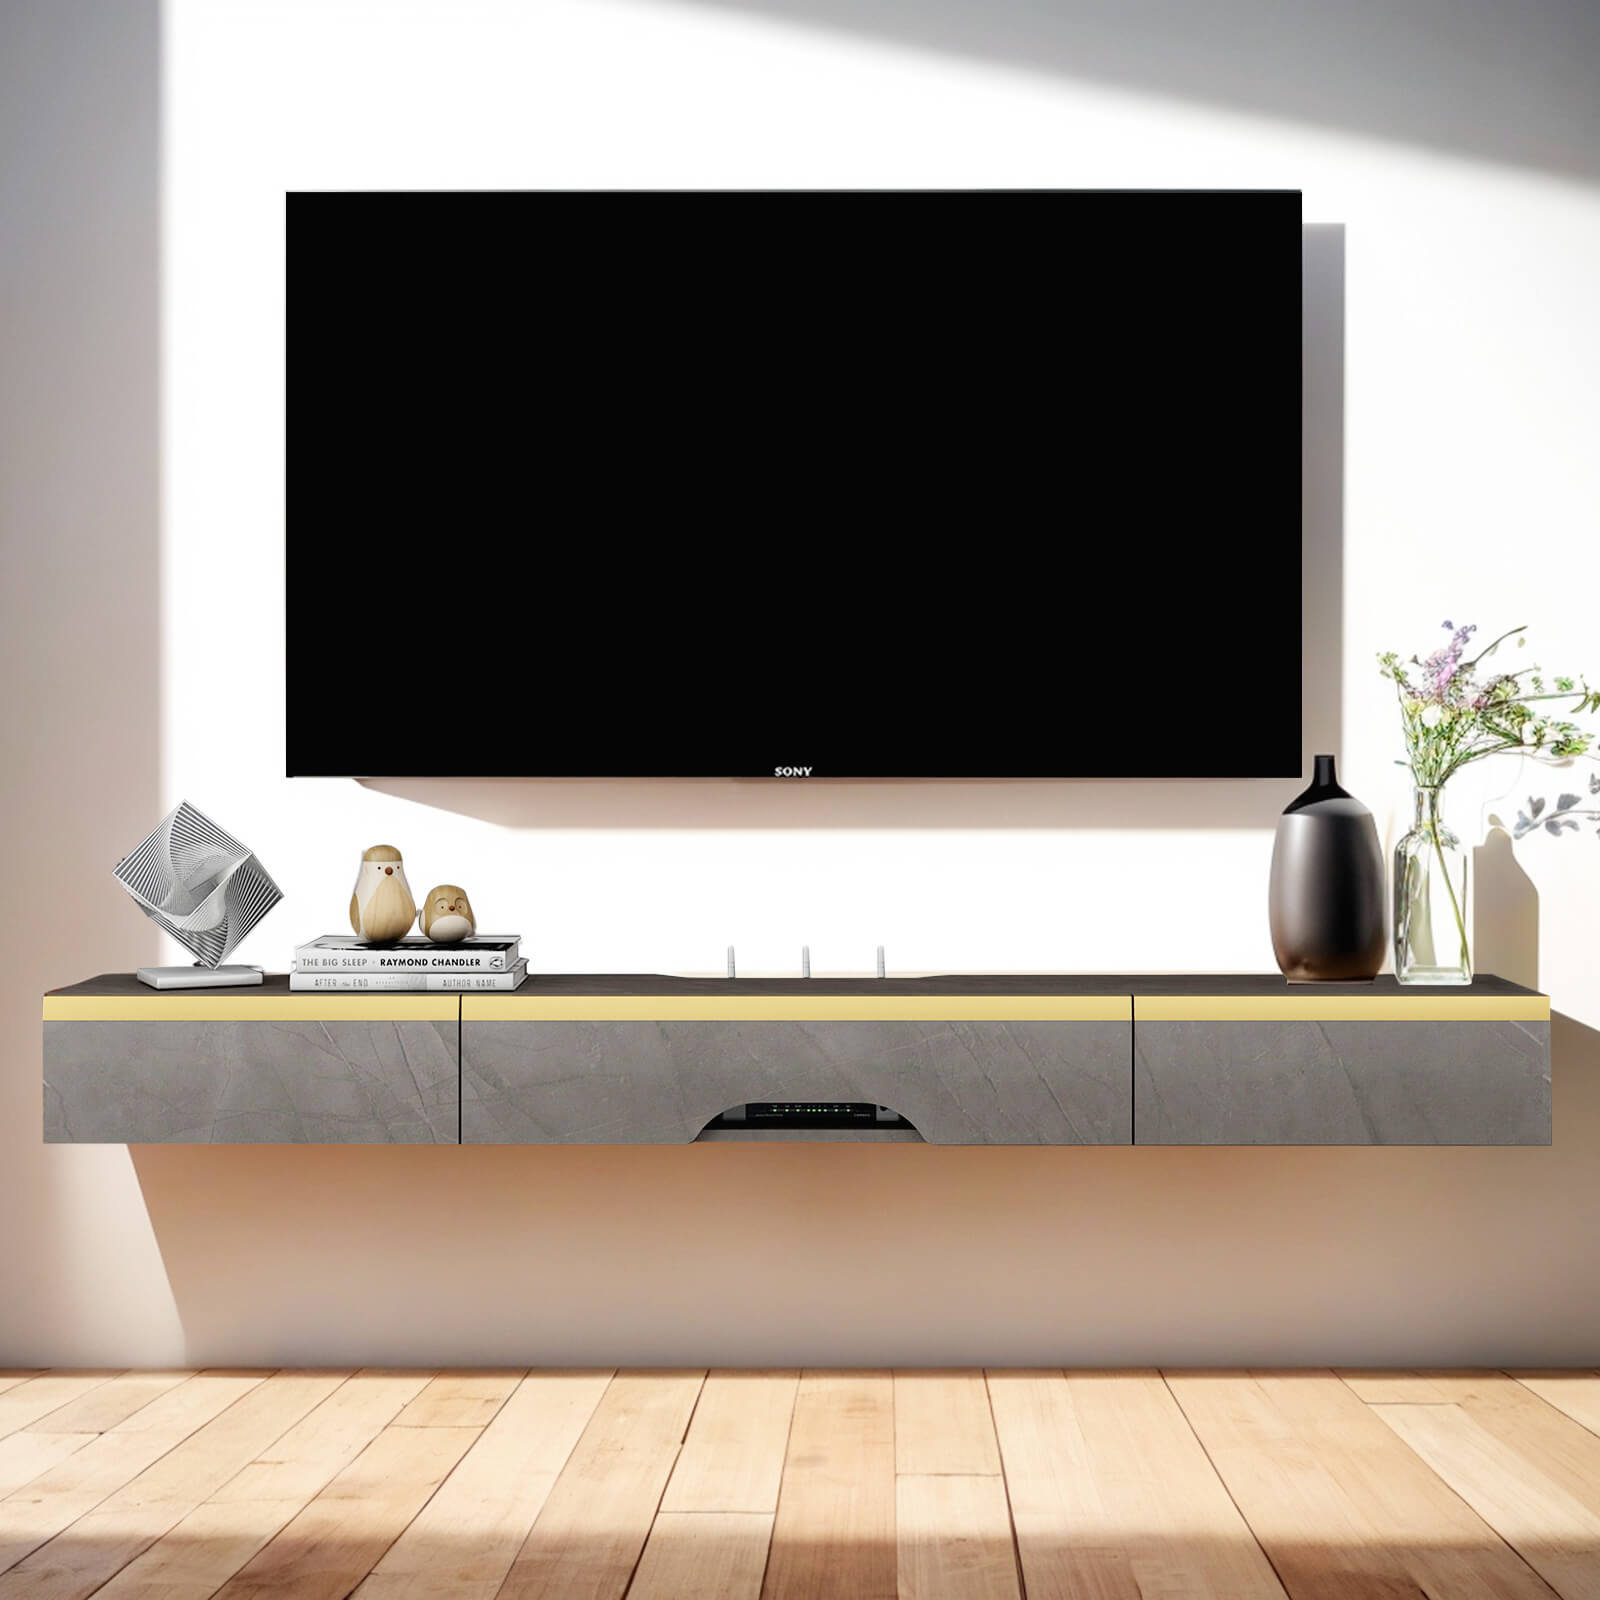 66.92" Plywood Floating TV Stand with Drawers for 70" 75" Televisions, Dark Grey with Golden